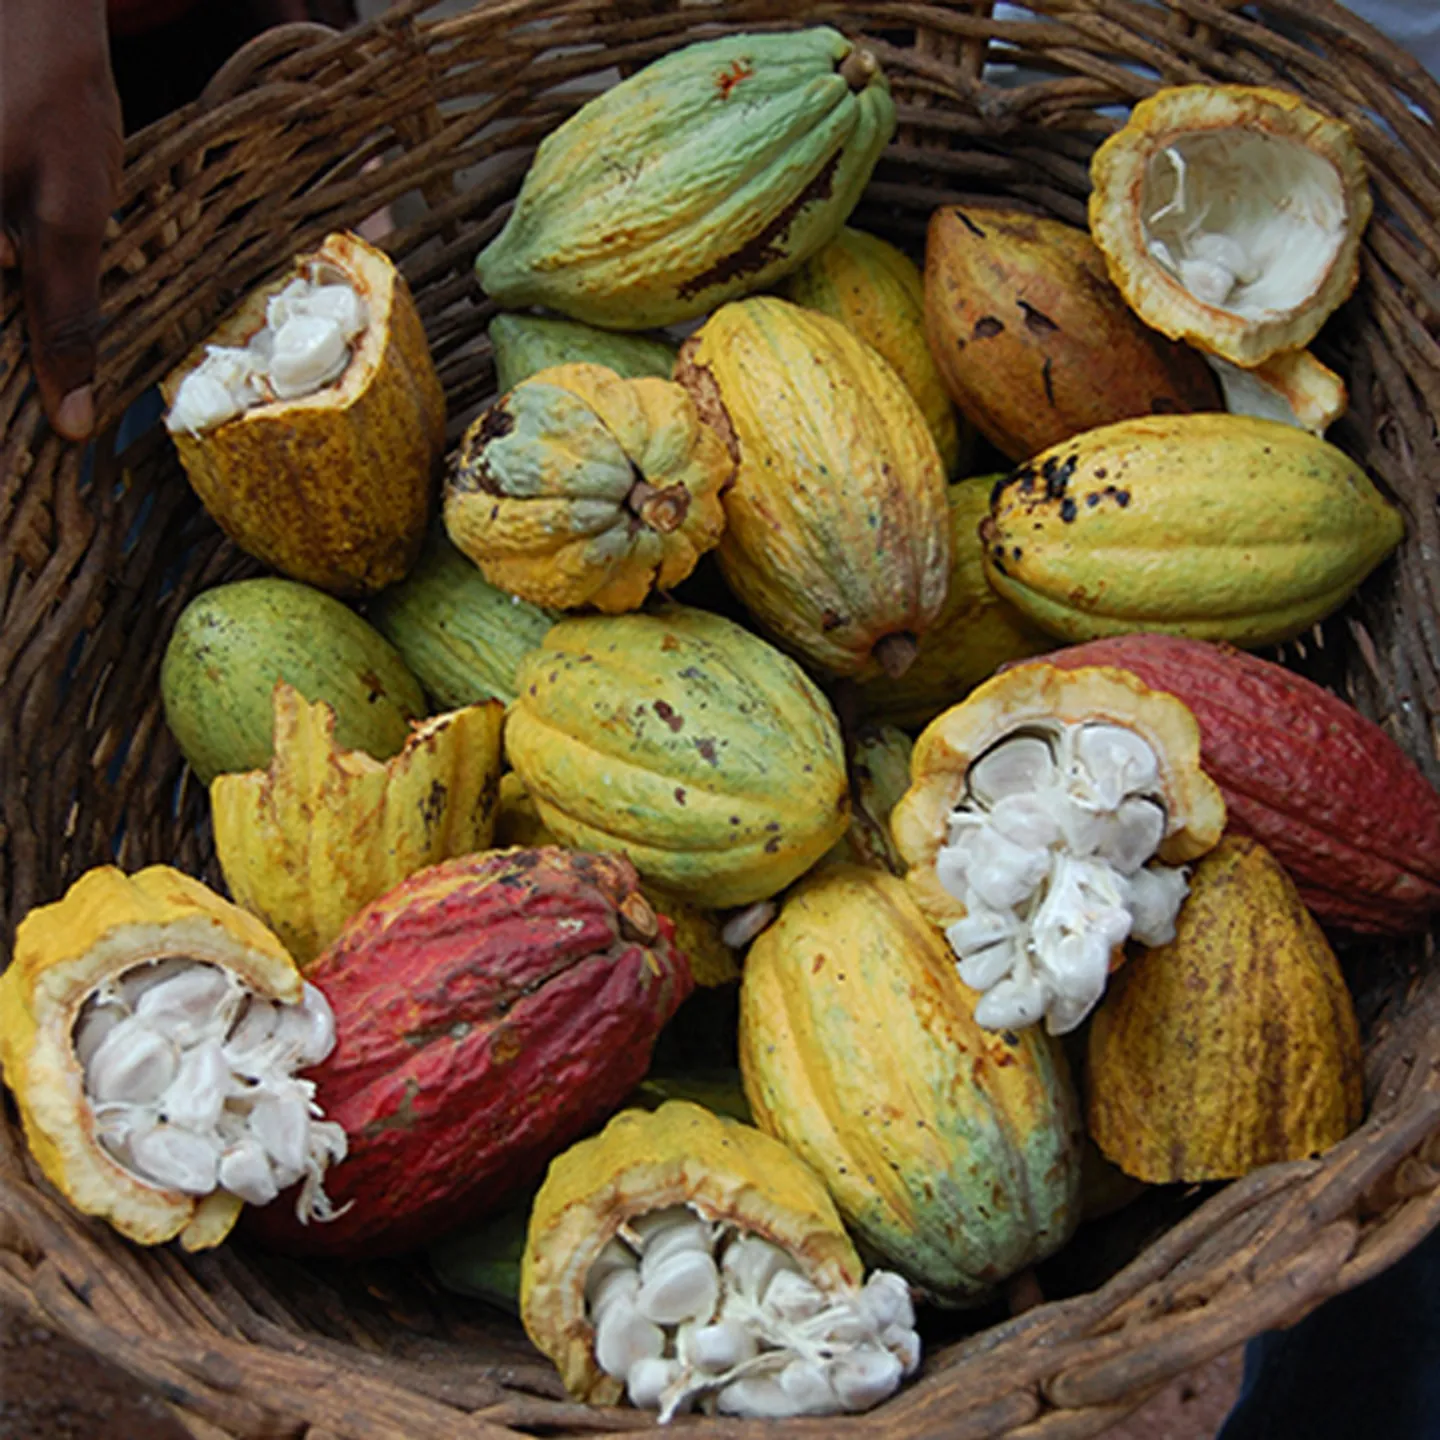 Discover 5 Top Solutions for Sustainable Cocoa Sourcing